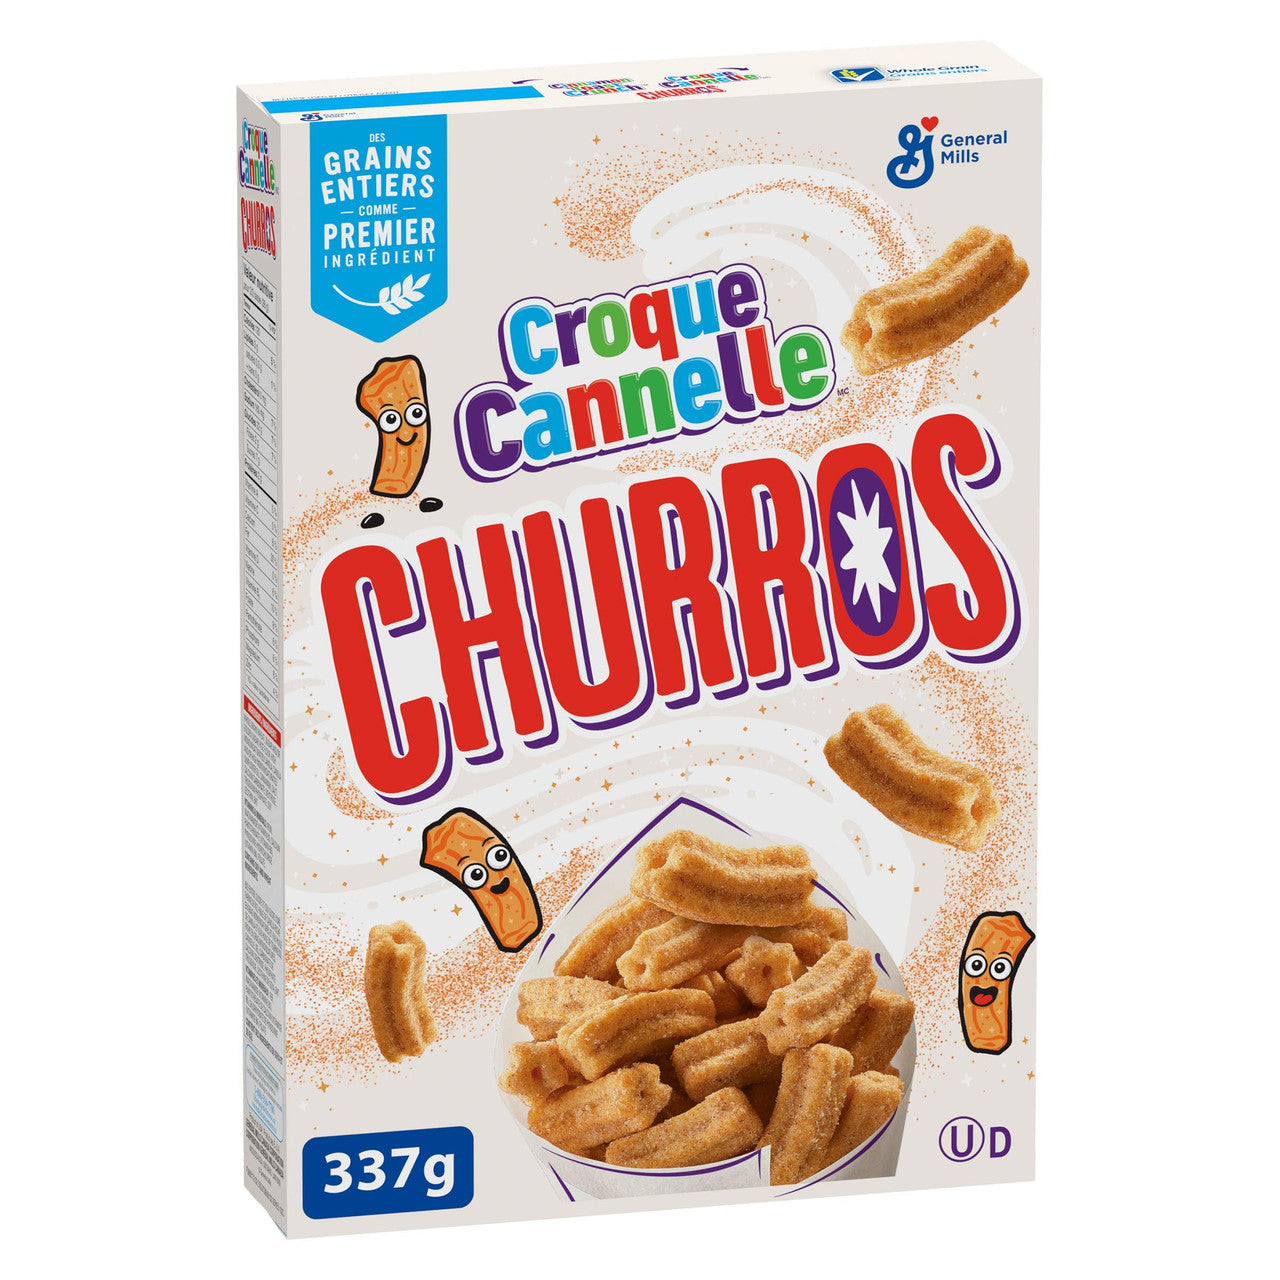 Cinnamon Toast Crunch Churros Cereal, 337g/11.9 oz., {Imported from Canada}